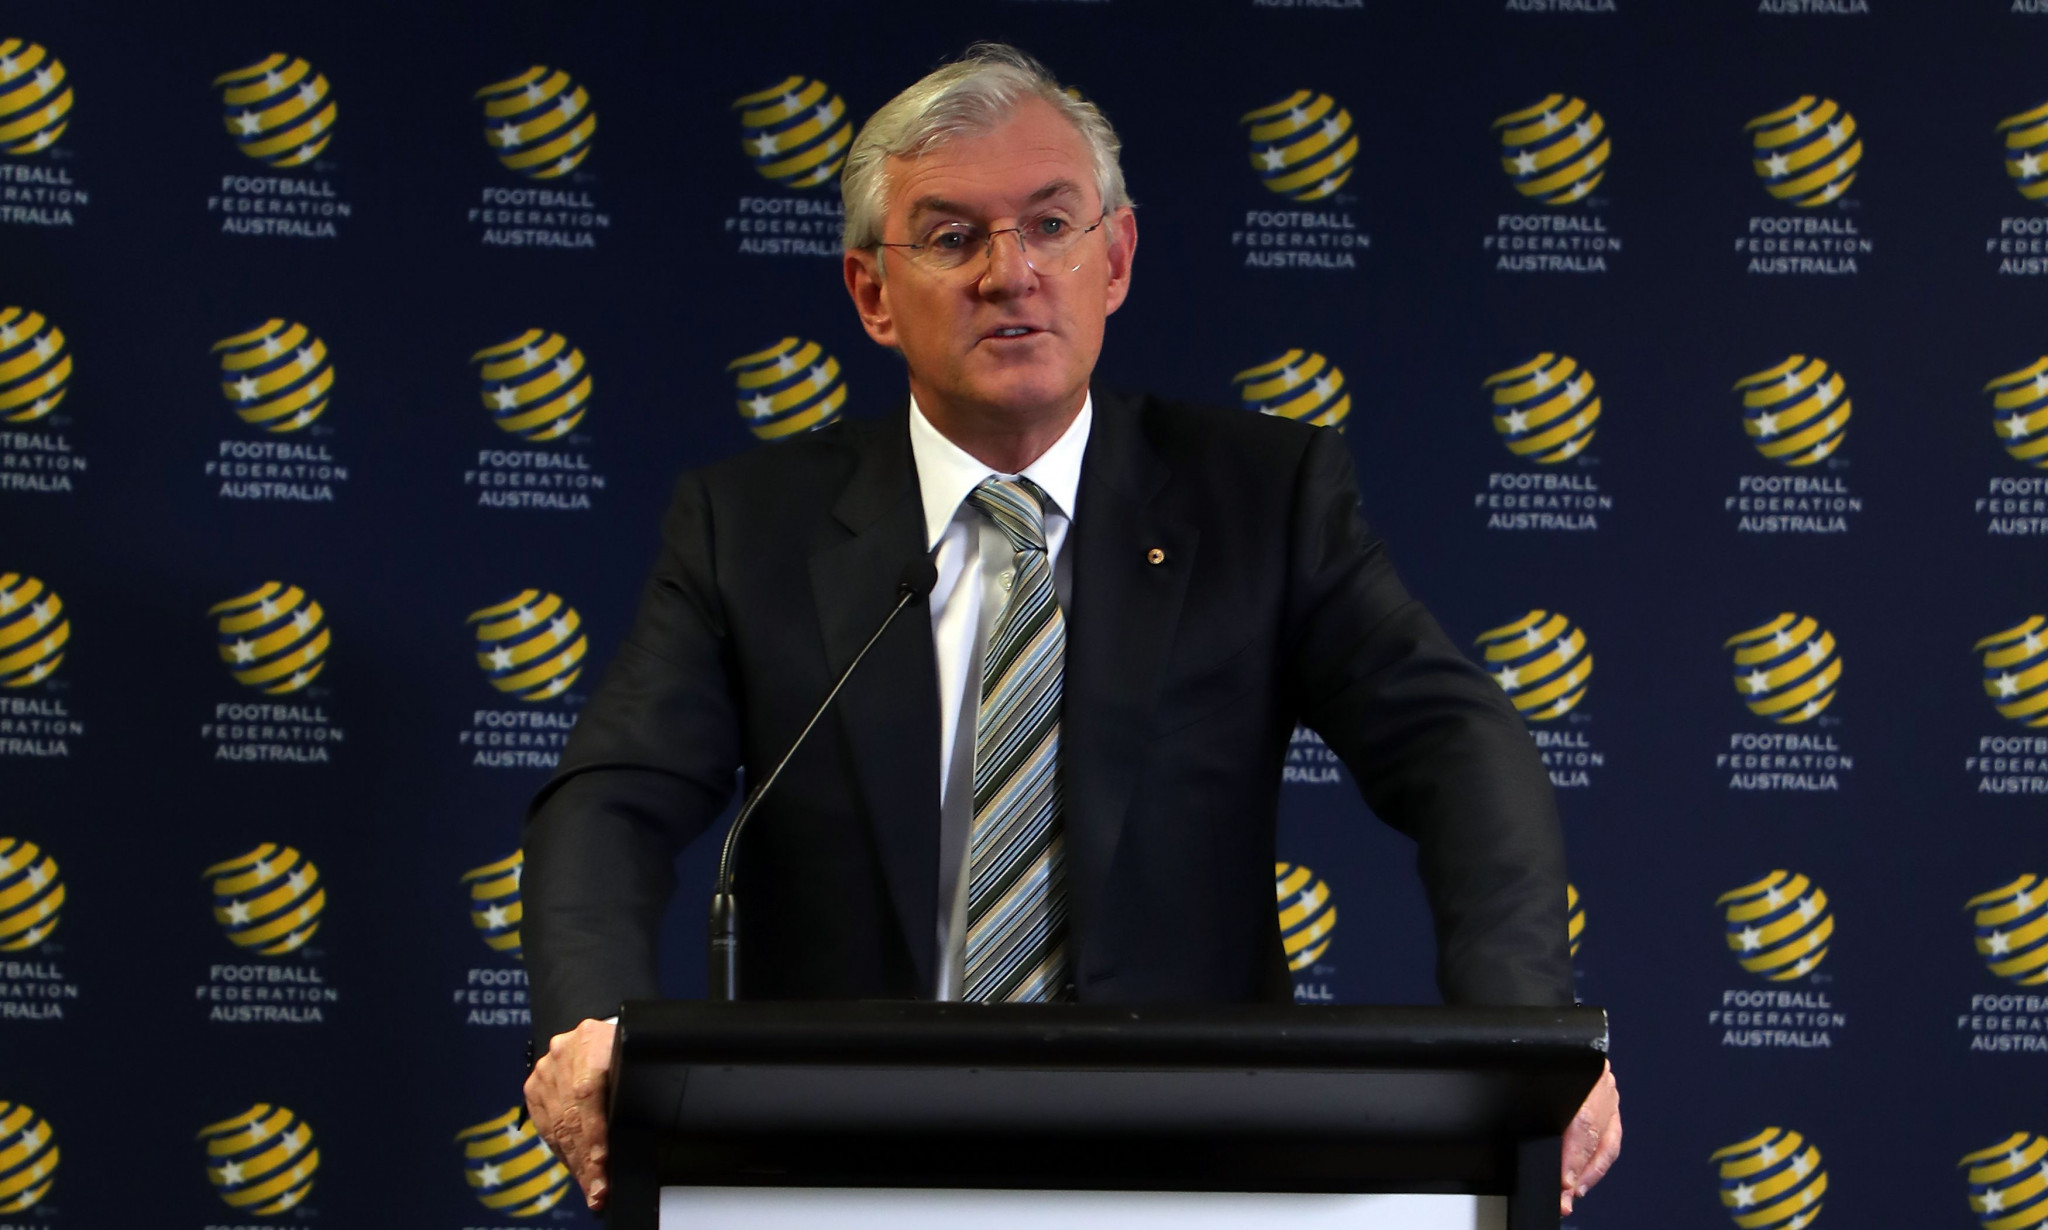 Football Federation Australia chairman Steven Lowy criticised the outcome of the meeting ©Getty Images